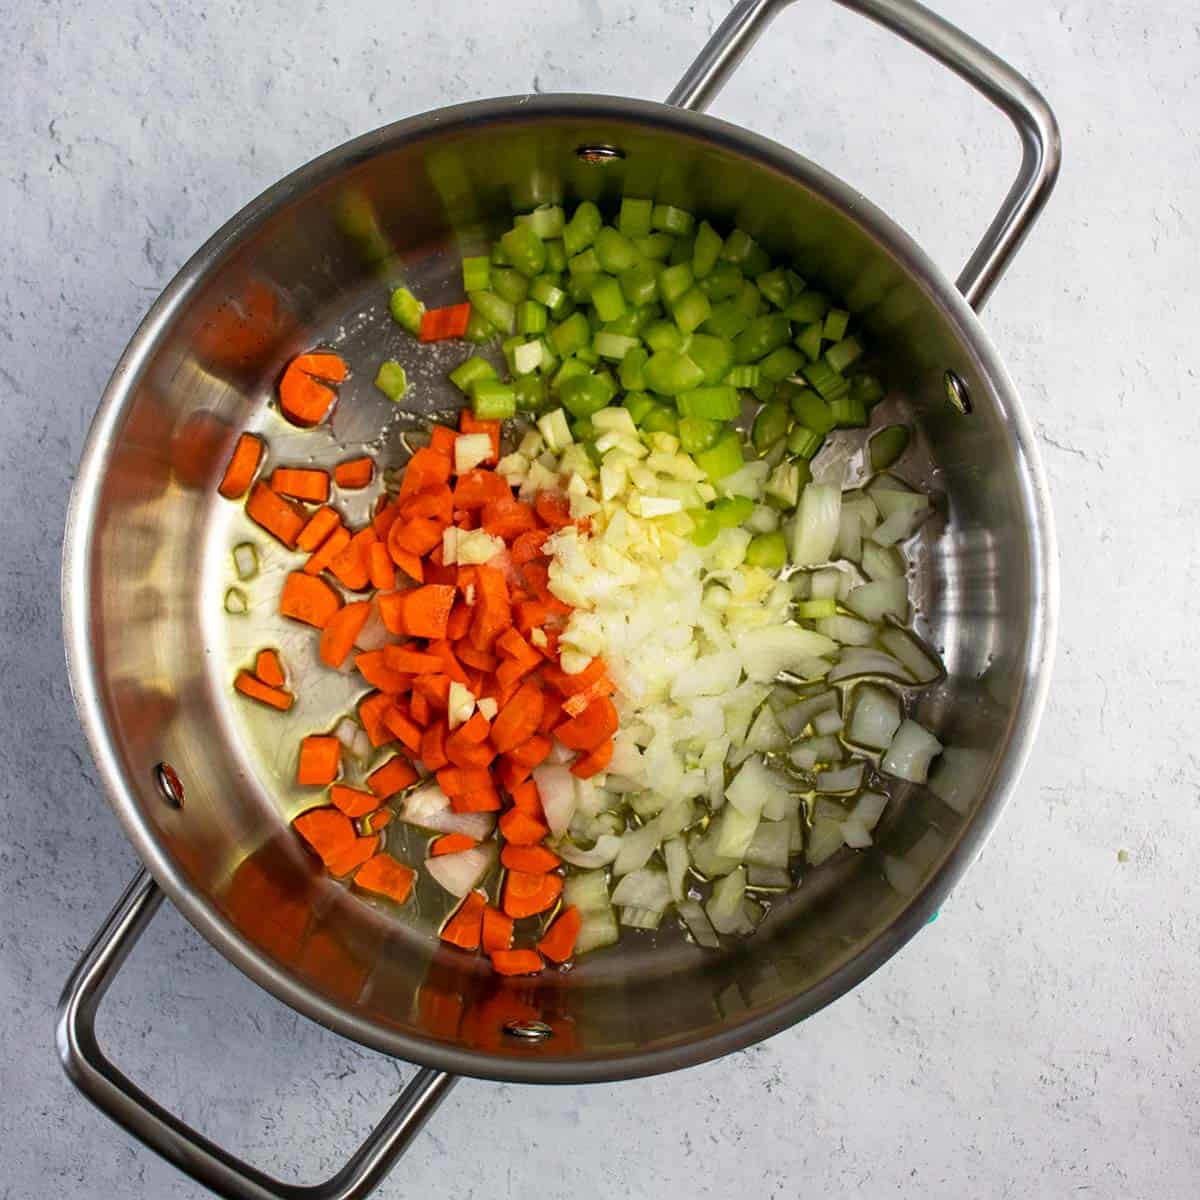 Diced carrots, onions, celery and garlic being sautéed in soup pan for vegan tomato soup.